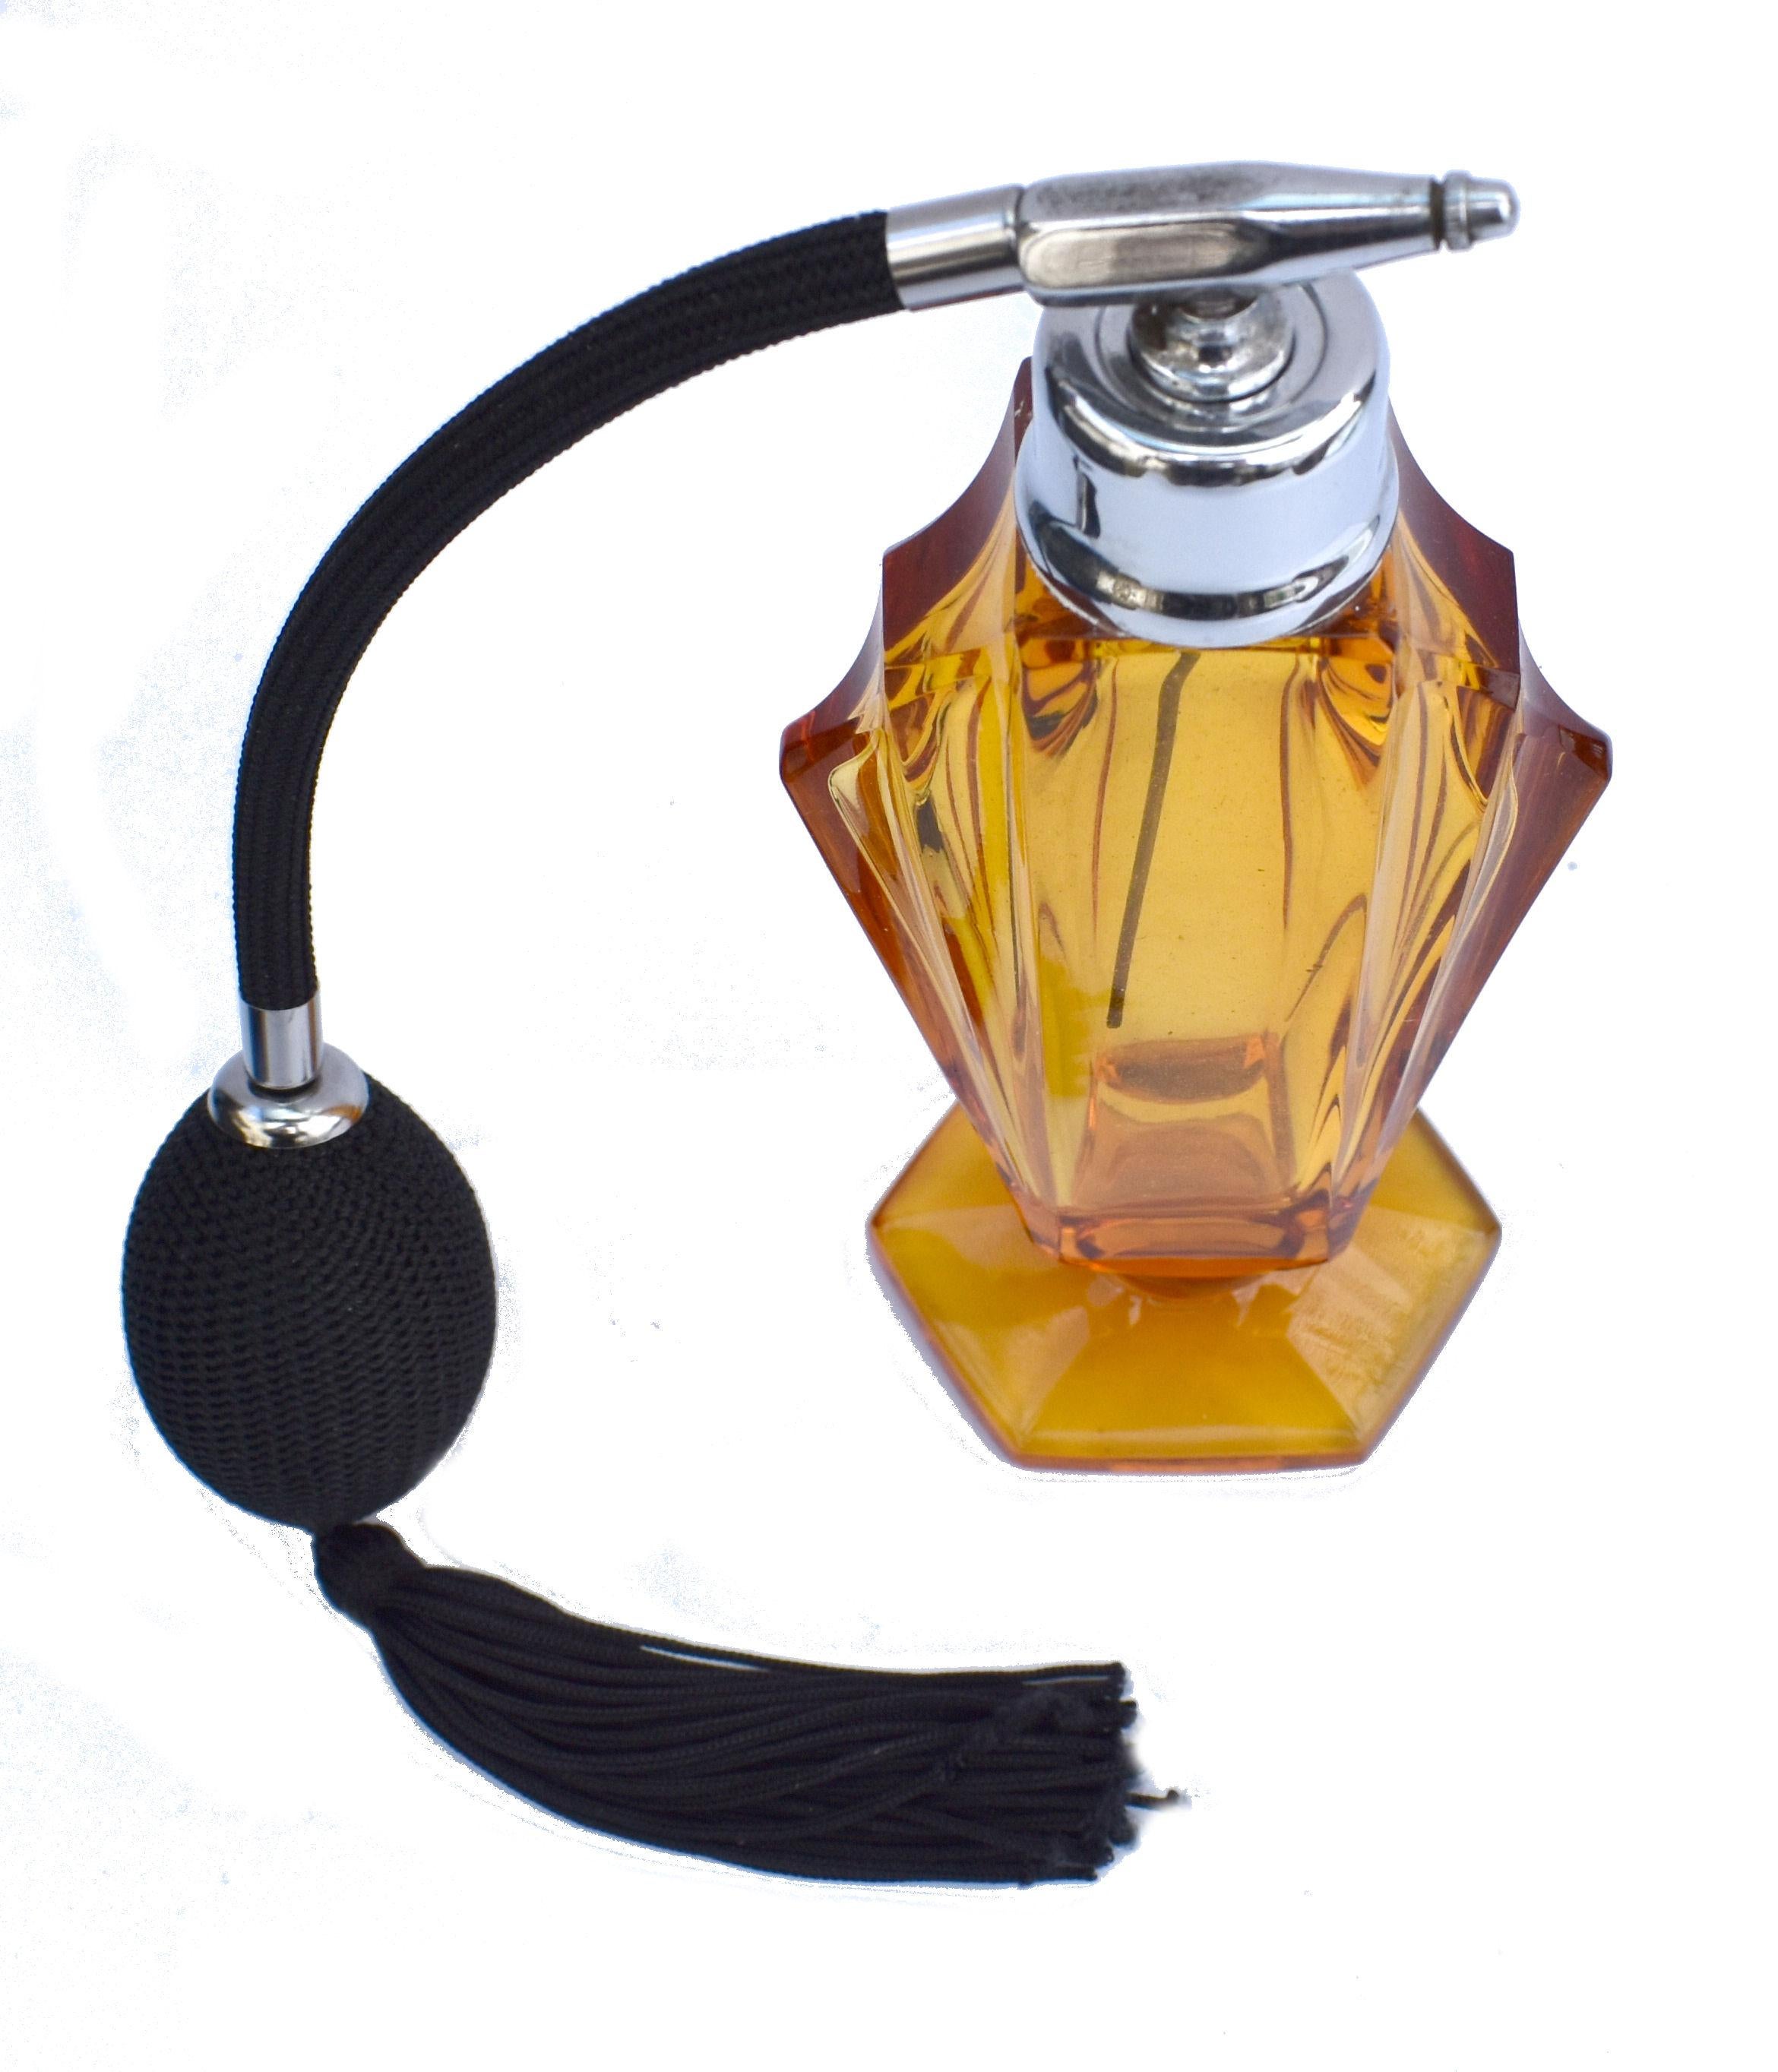 This fabulous Art Deco perfume atomiser is an absolute delight. Large glass body with multi angled edges is in a beautiful amber color with black silk bulb and tassel and chrome fittings. Much larger in size than normal so has a real presence about